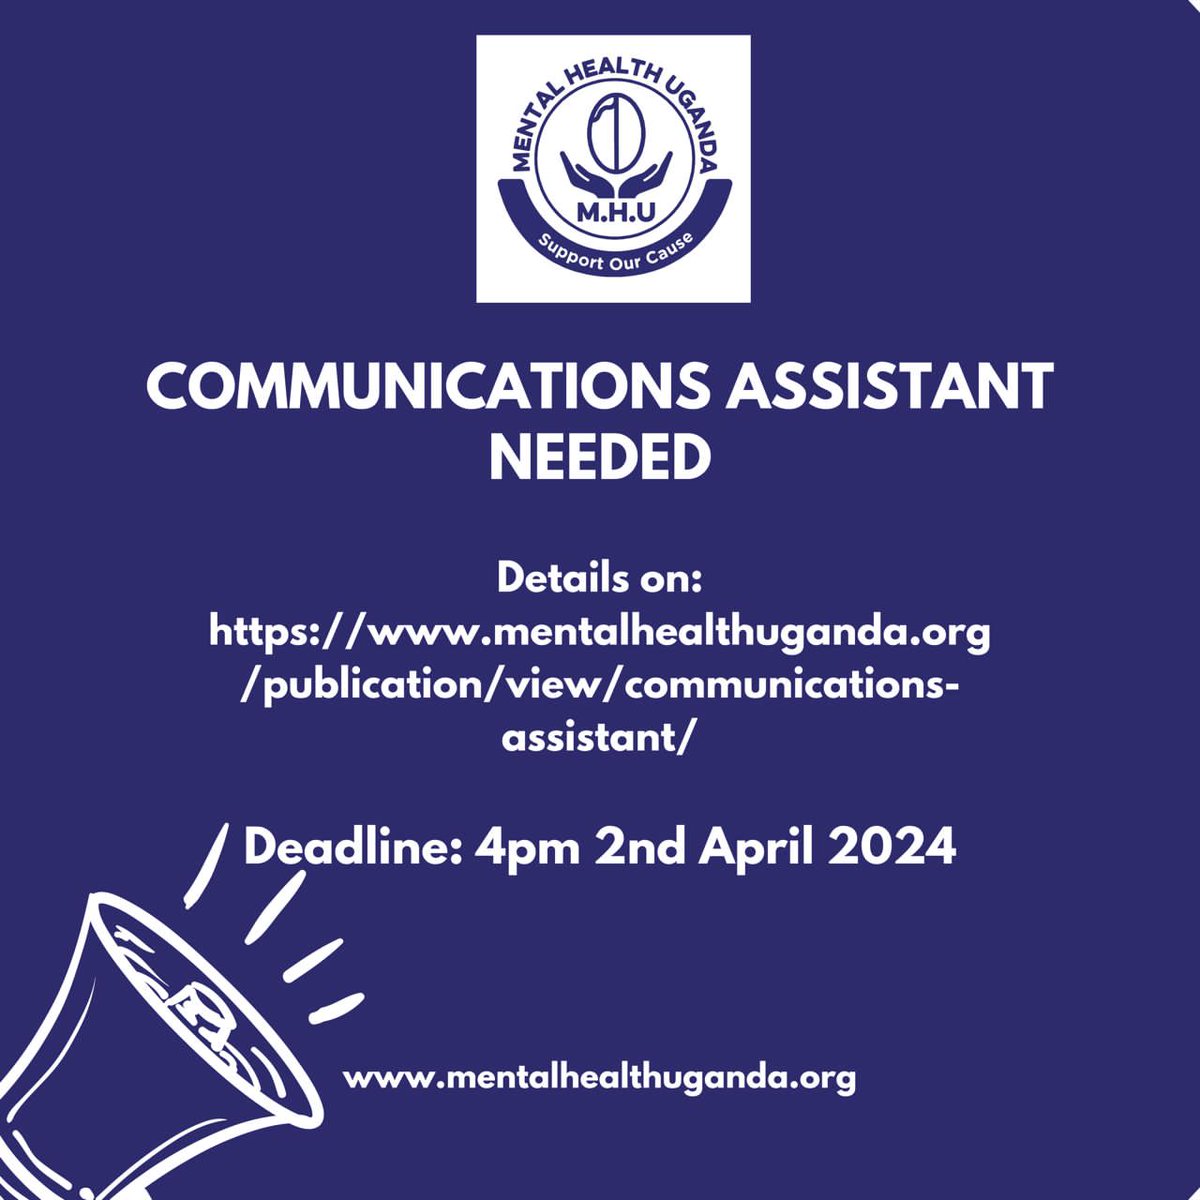 #FeatureFriday Are you passionate about communications and mental health? Here's a chance for you to join our team! We are looking for a communications assistant. Details available on mentalhealthuganda.org/publication/vi… Deadline: 4pm, 2nd April 2024. #SupportOurCause #MentalHealthMatters